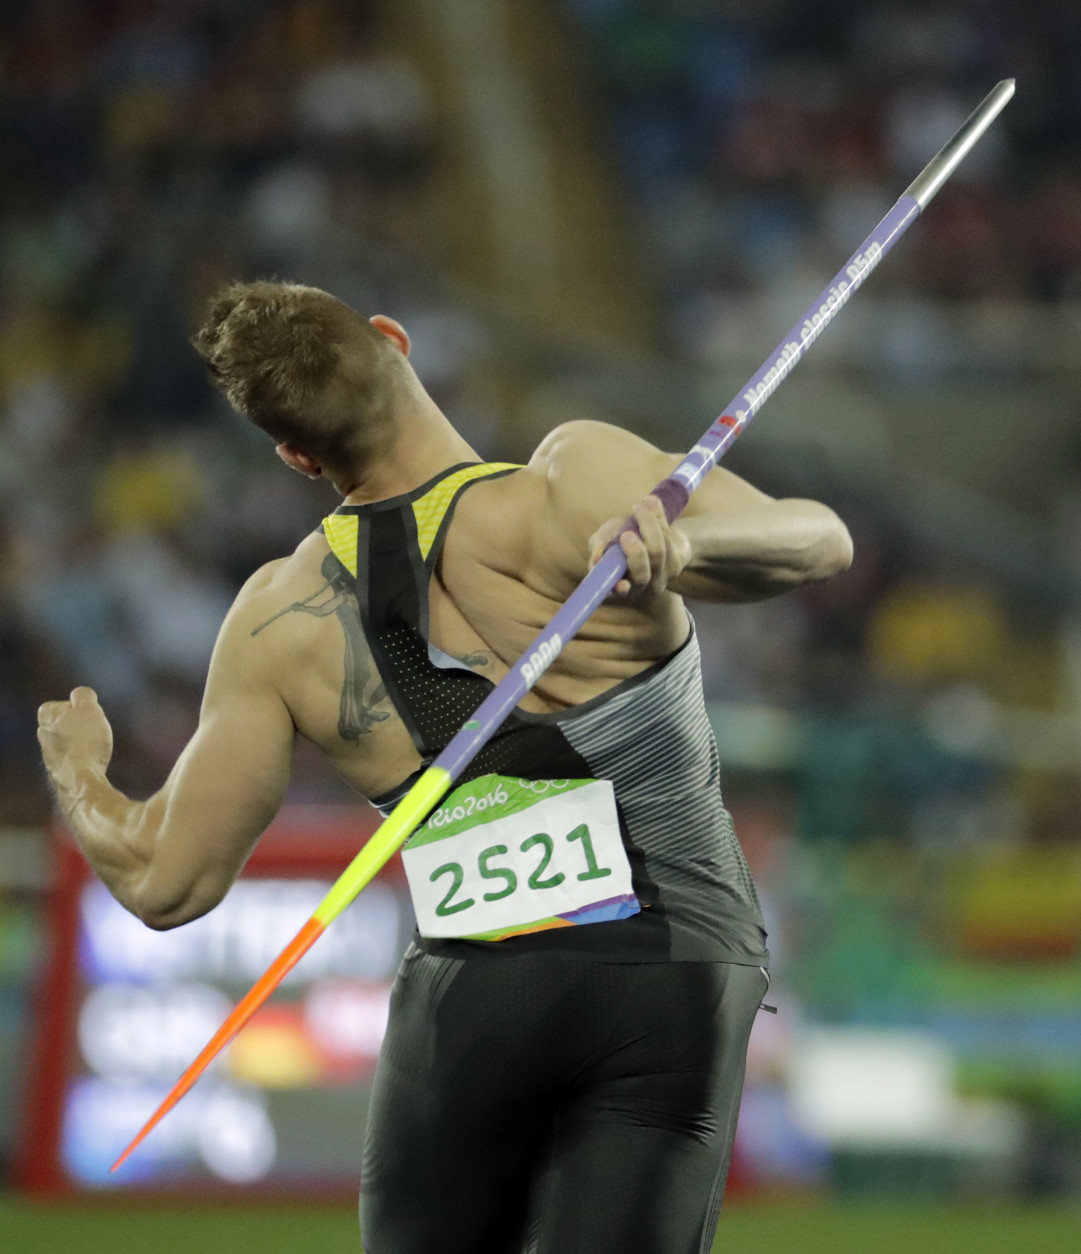 Germany's Johannes Vetter competes in the final of the men's javelin throw during the athletics competitions of the 2016 Summer Olympics at the Olympic stadium in Rio de Janeiro, Brazil, Saturday, Aug. 20, 2016. (AP Photo/Charlie Riedel)